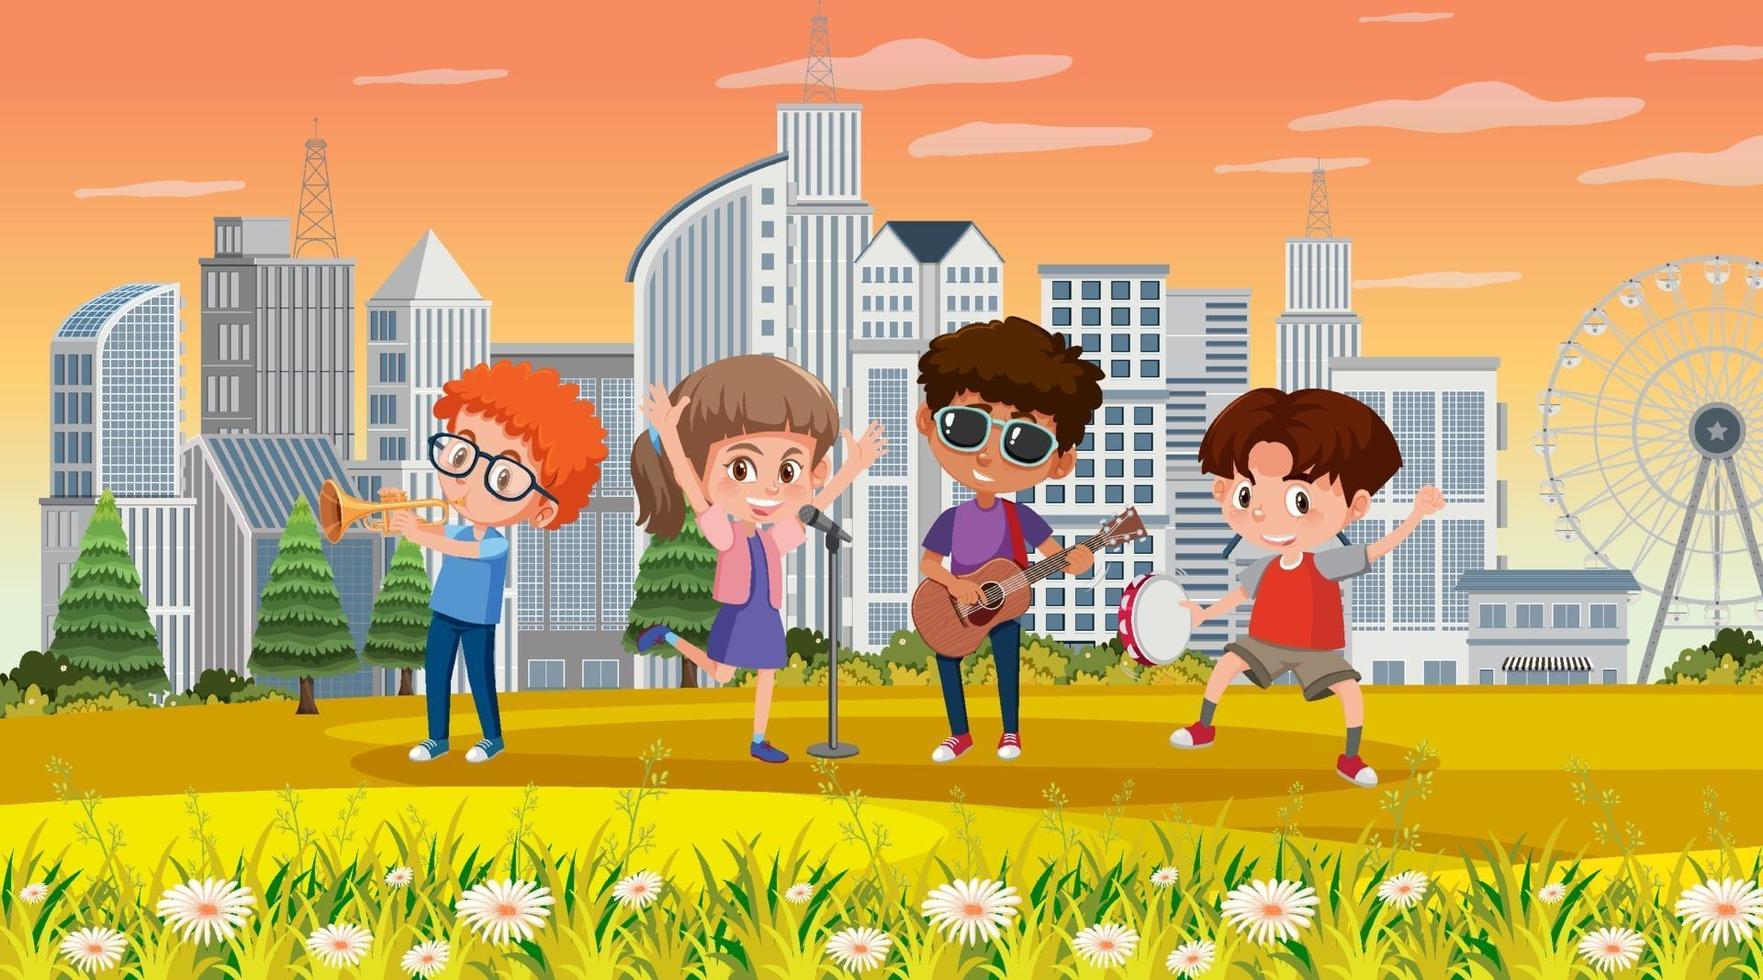 City scene with many children playing music instruments in the park vector